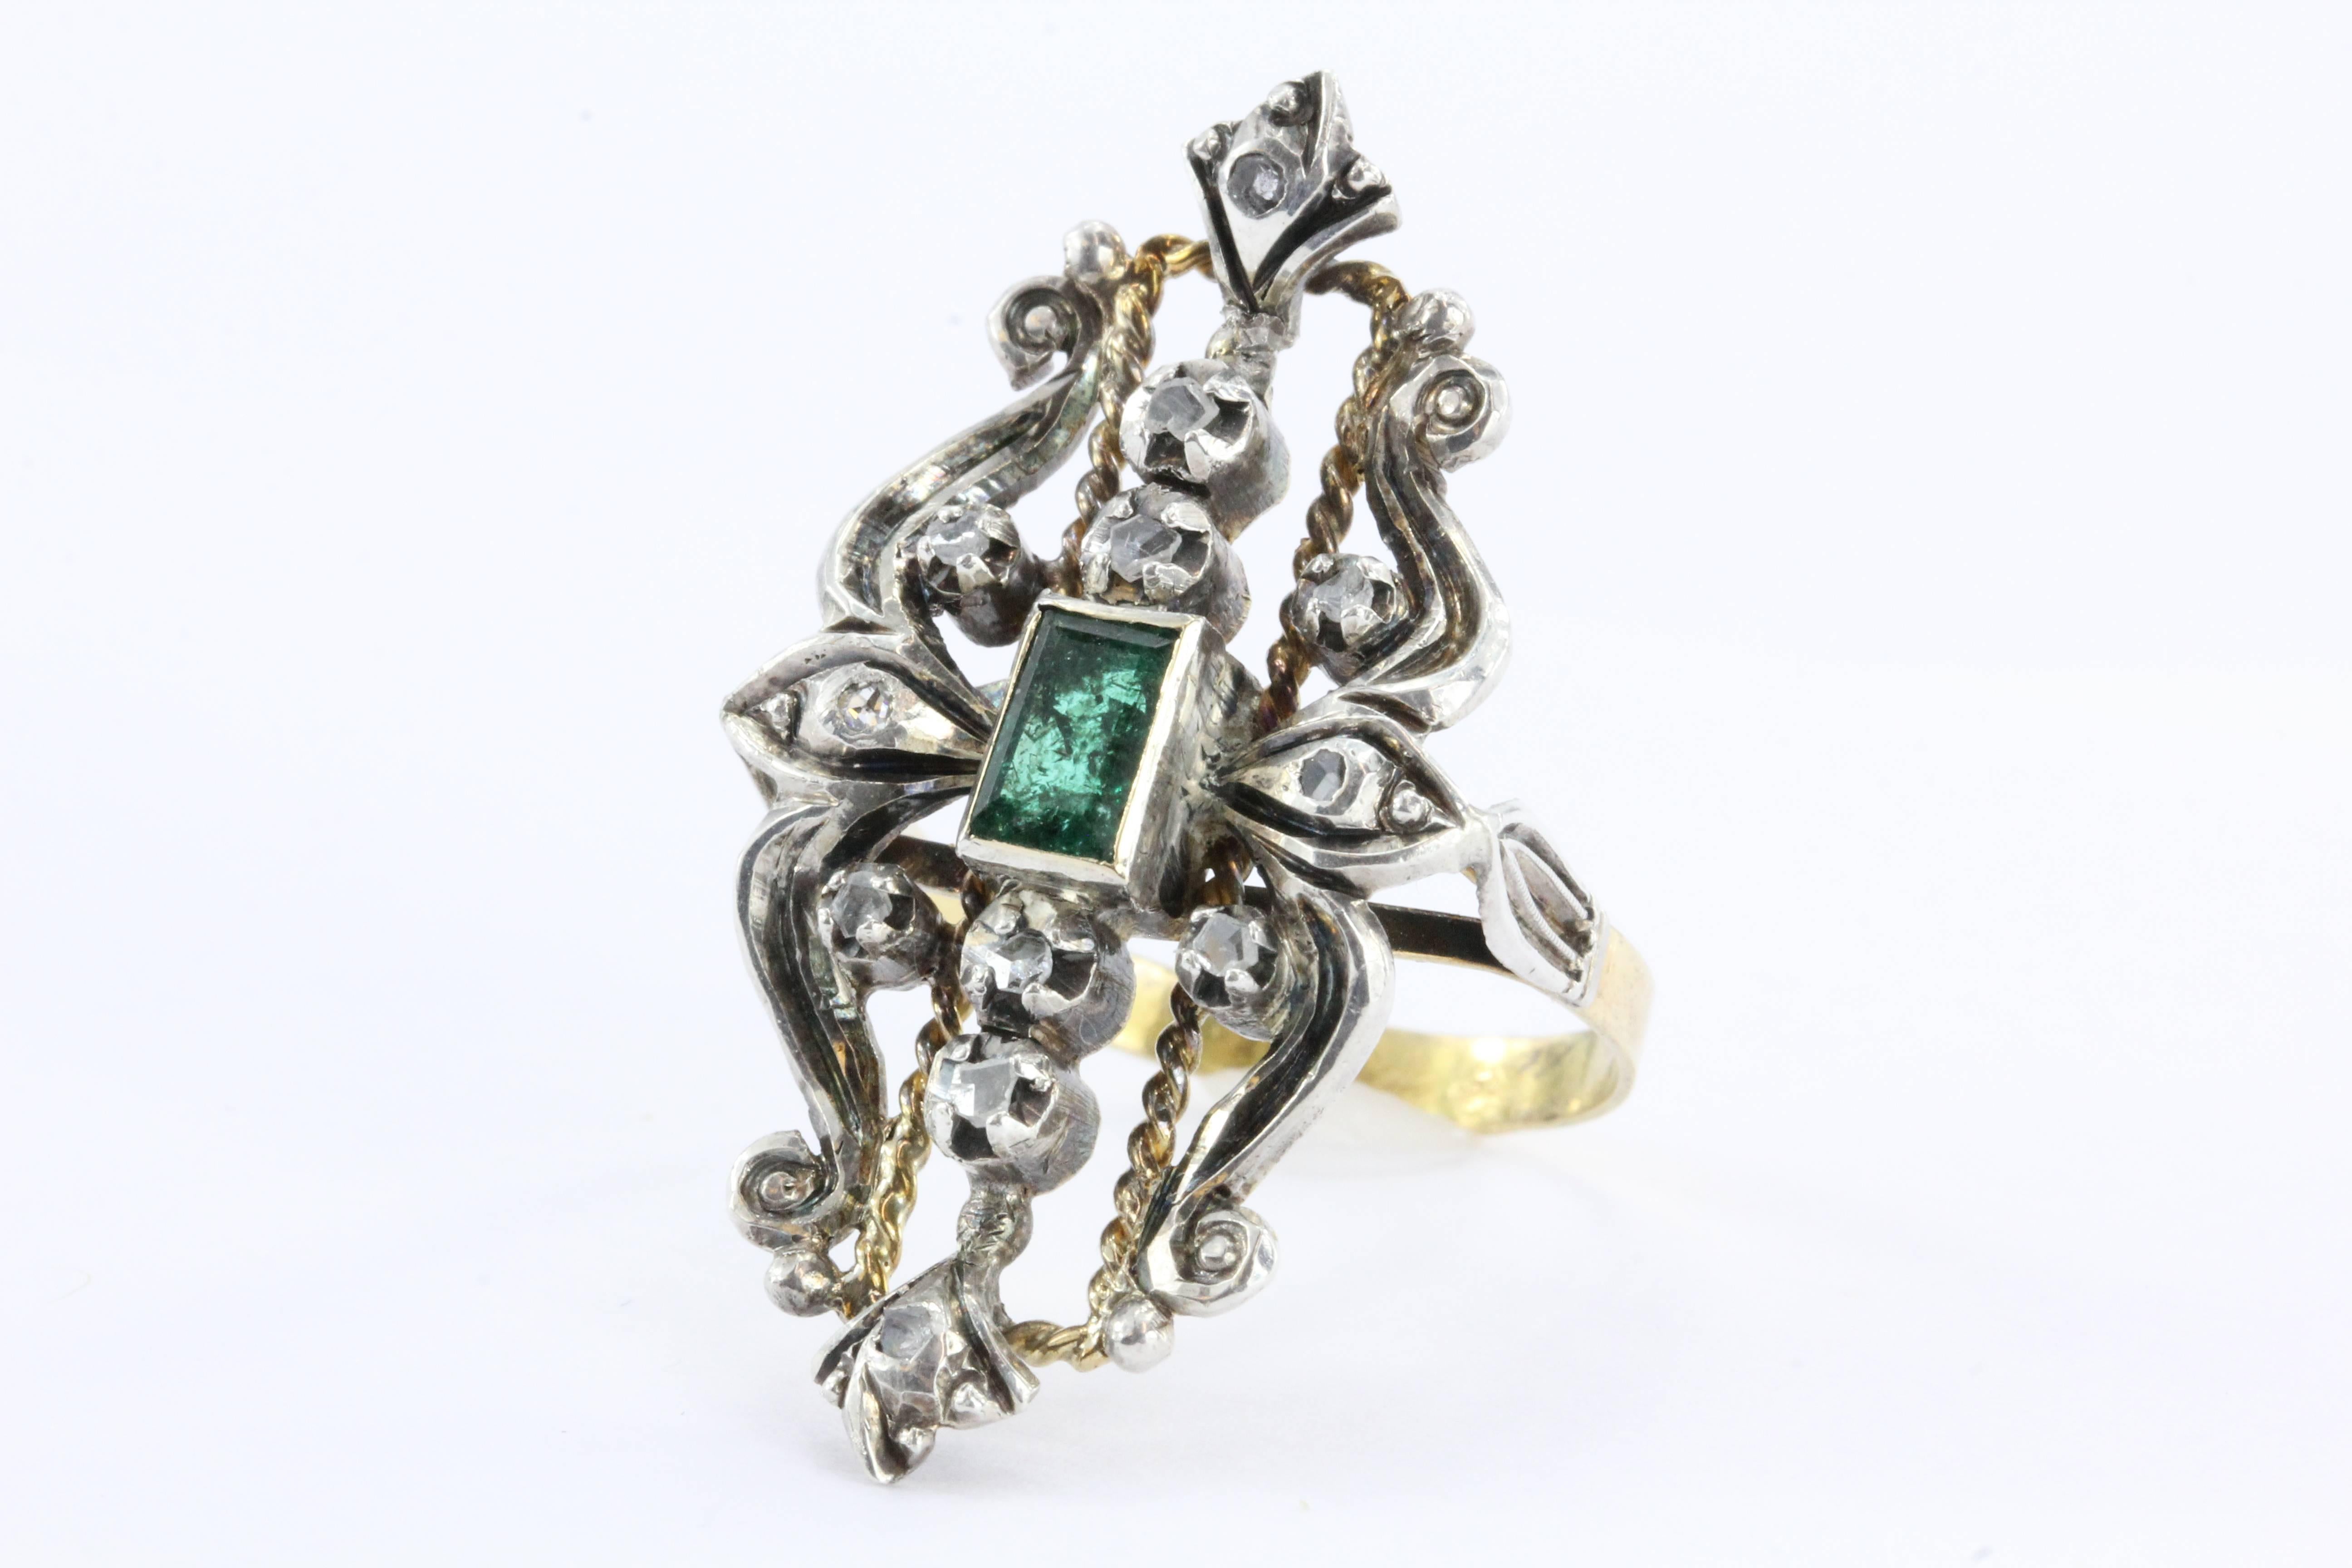 Antique 19Kt Gold & Silver Ring from the 19th century. This intricate and elaborate piece of art is set with about .30 carats of genuine rose cut diamonds. The center emerald is about .32 carat and emerald cut. The piece is entirely hand made and in